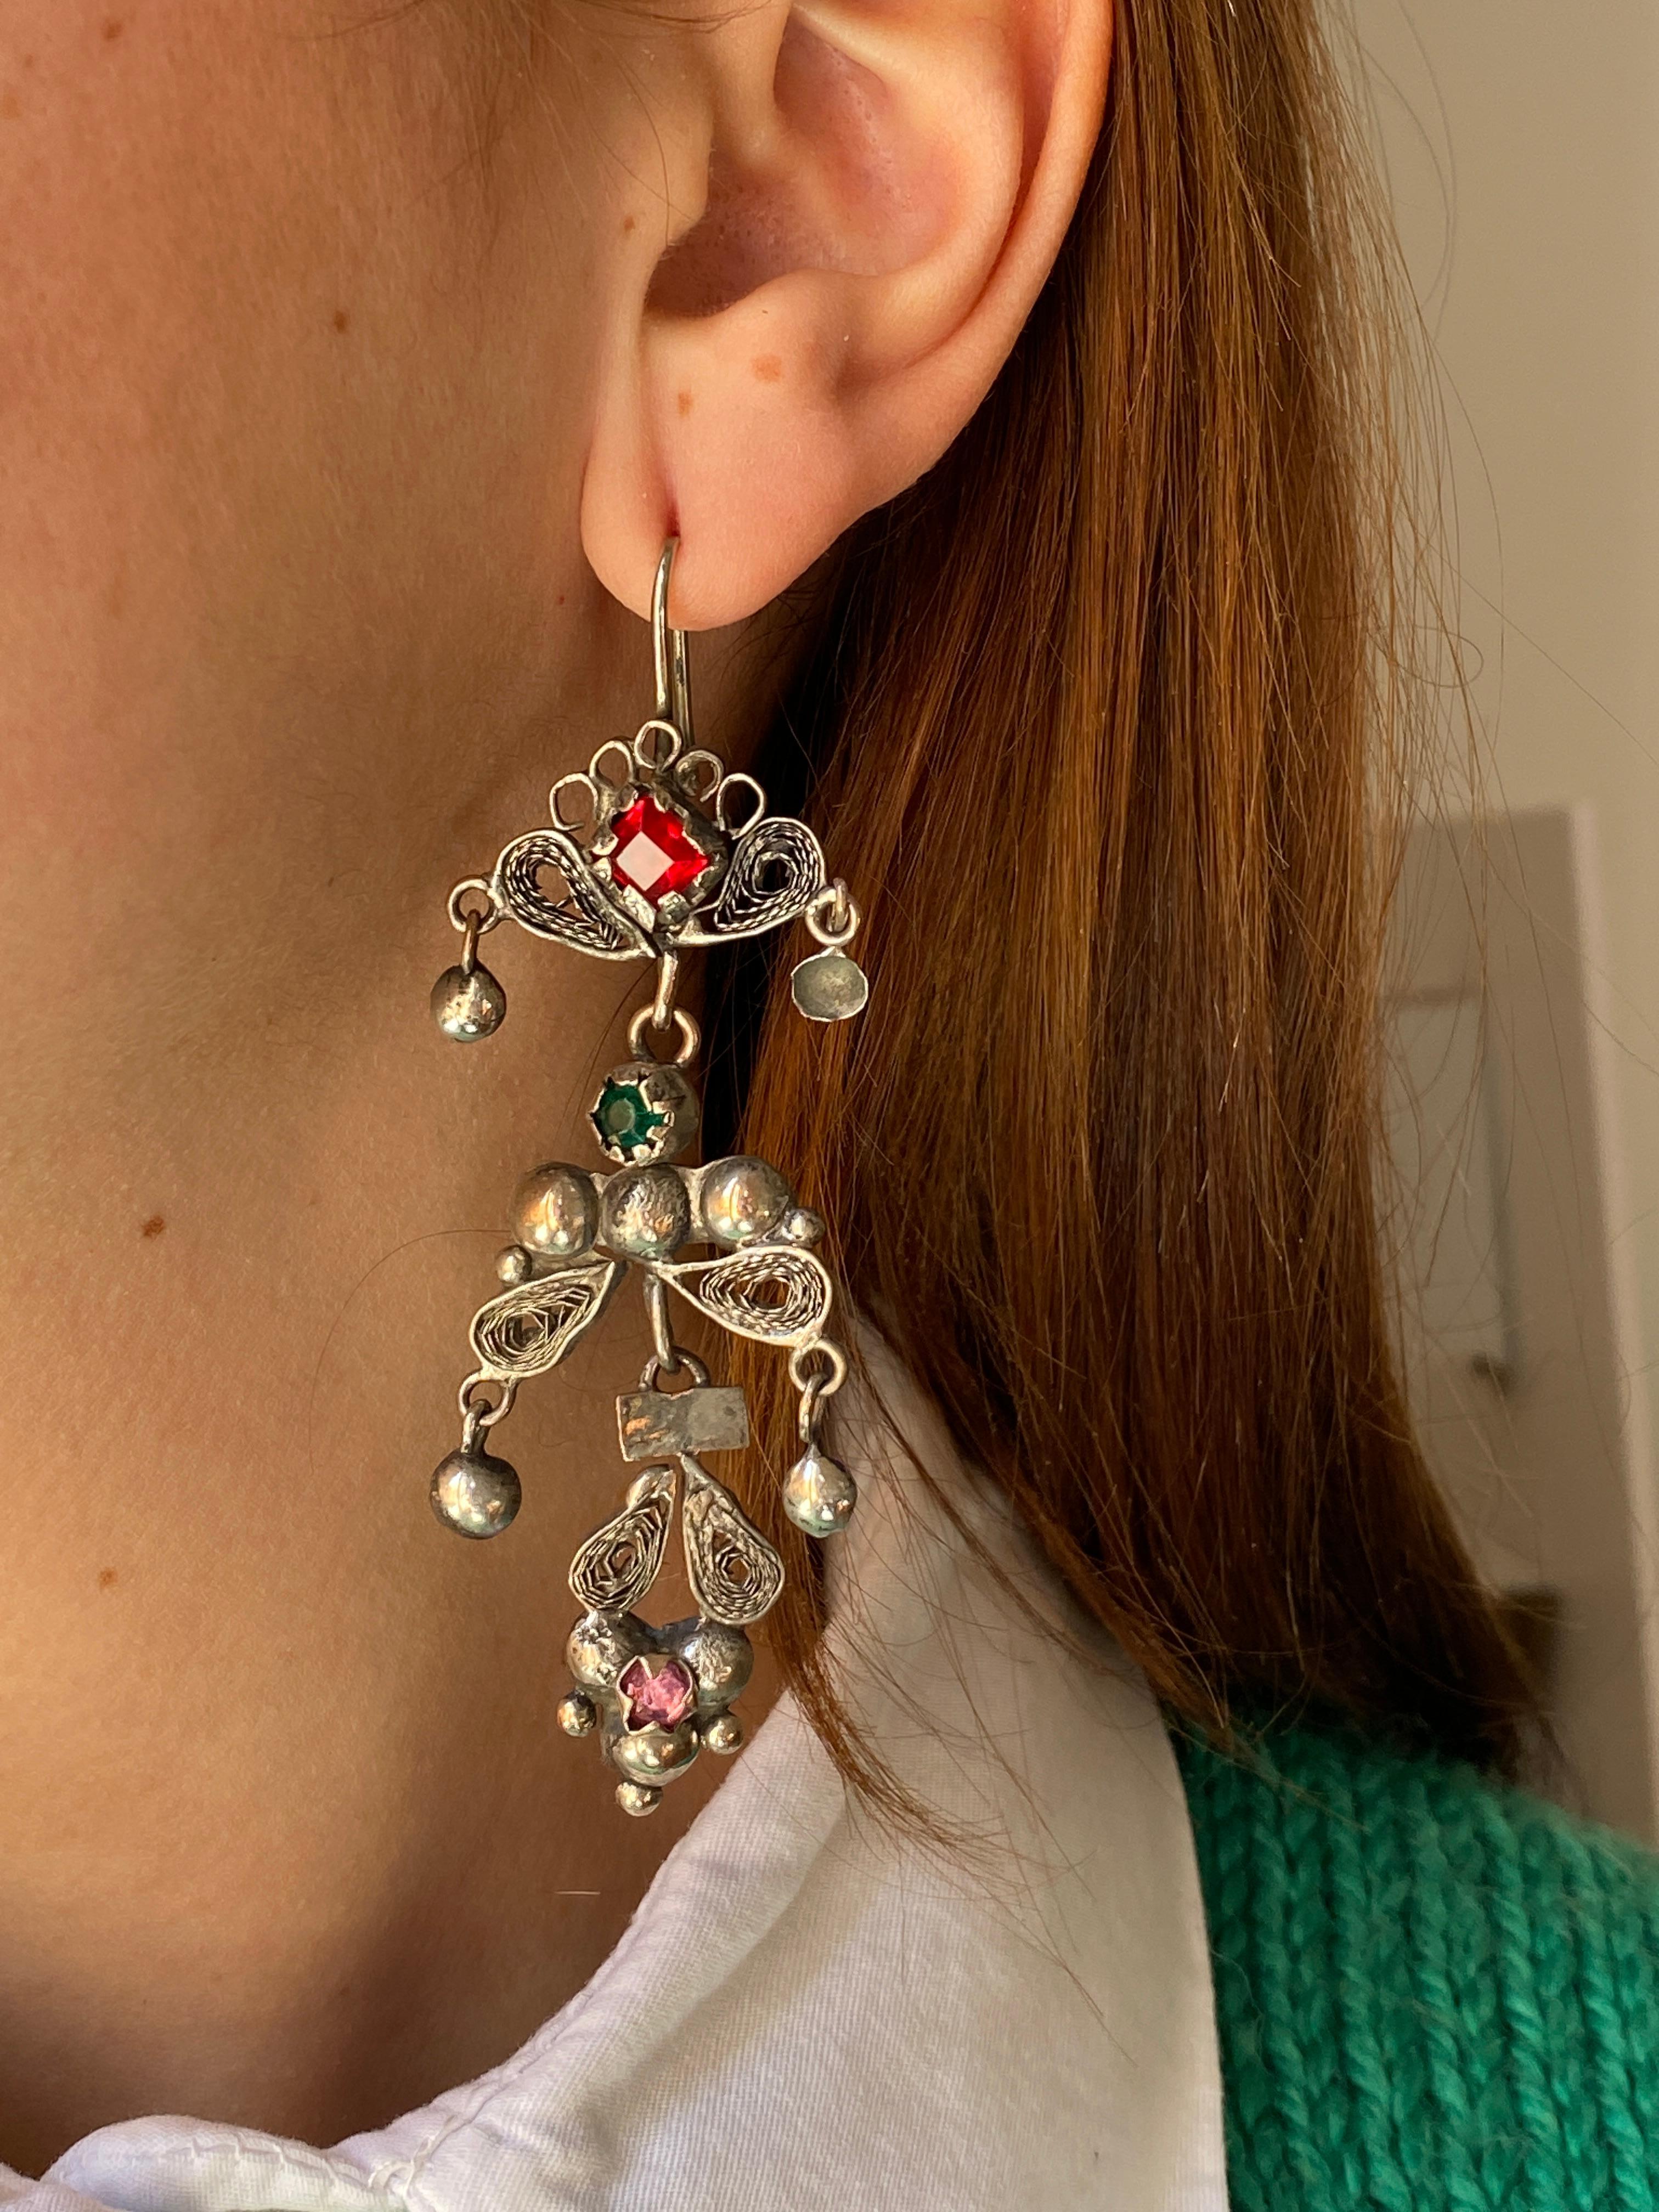 Introducing these exquisite filigree hens crafted earrings, comprised of three jointed parts. The hook effortlessly fits onto the lobe, suspending a floral and feminine design with a captivating bohemian and vintage allure. Adorned with glass stones